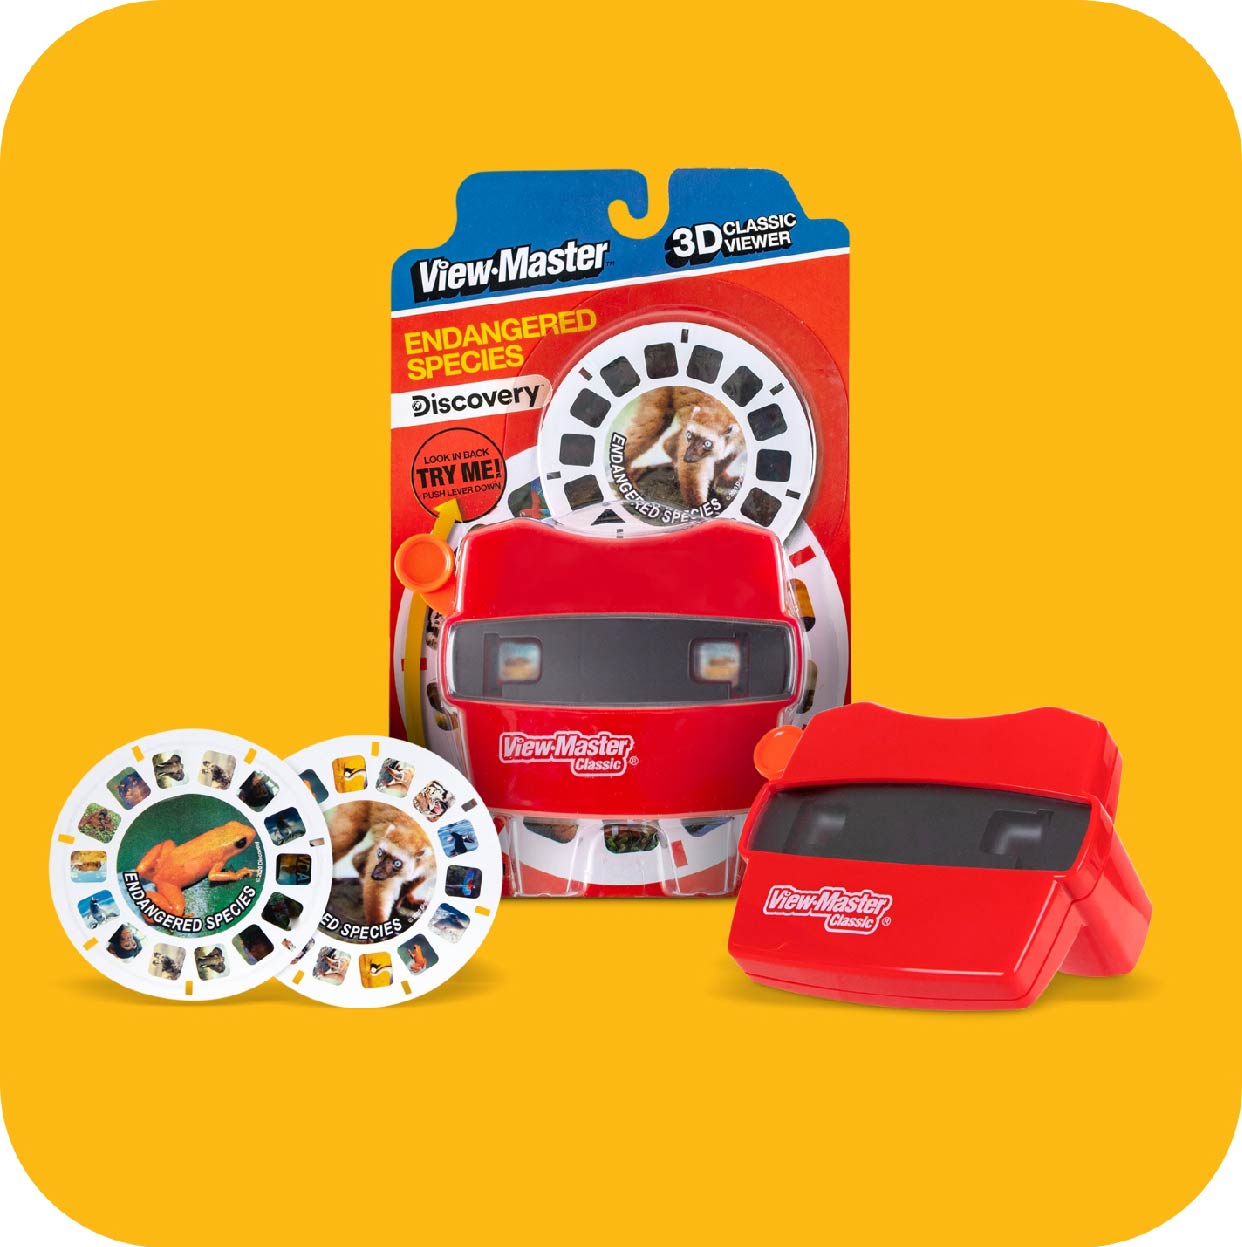 ViewMaster Classic set